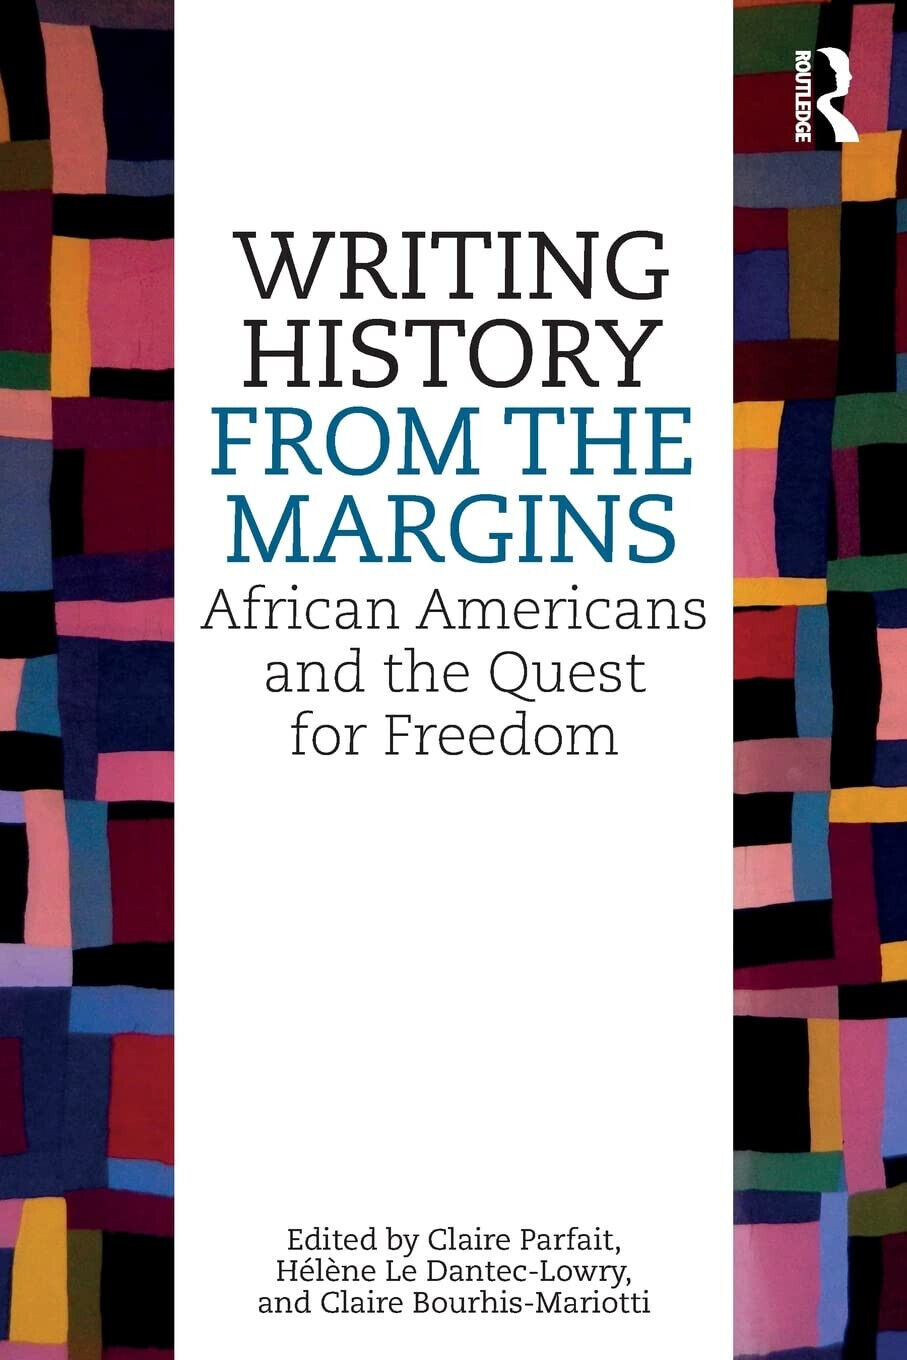 Writing History from the Margins - Claire Parfait - Routledge, 2016